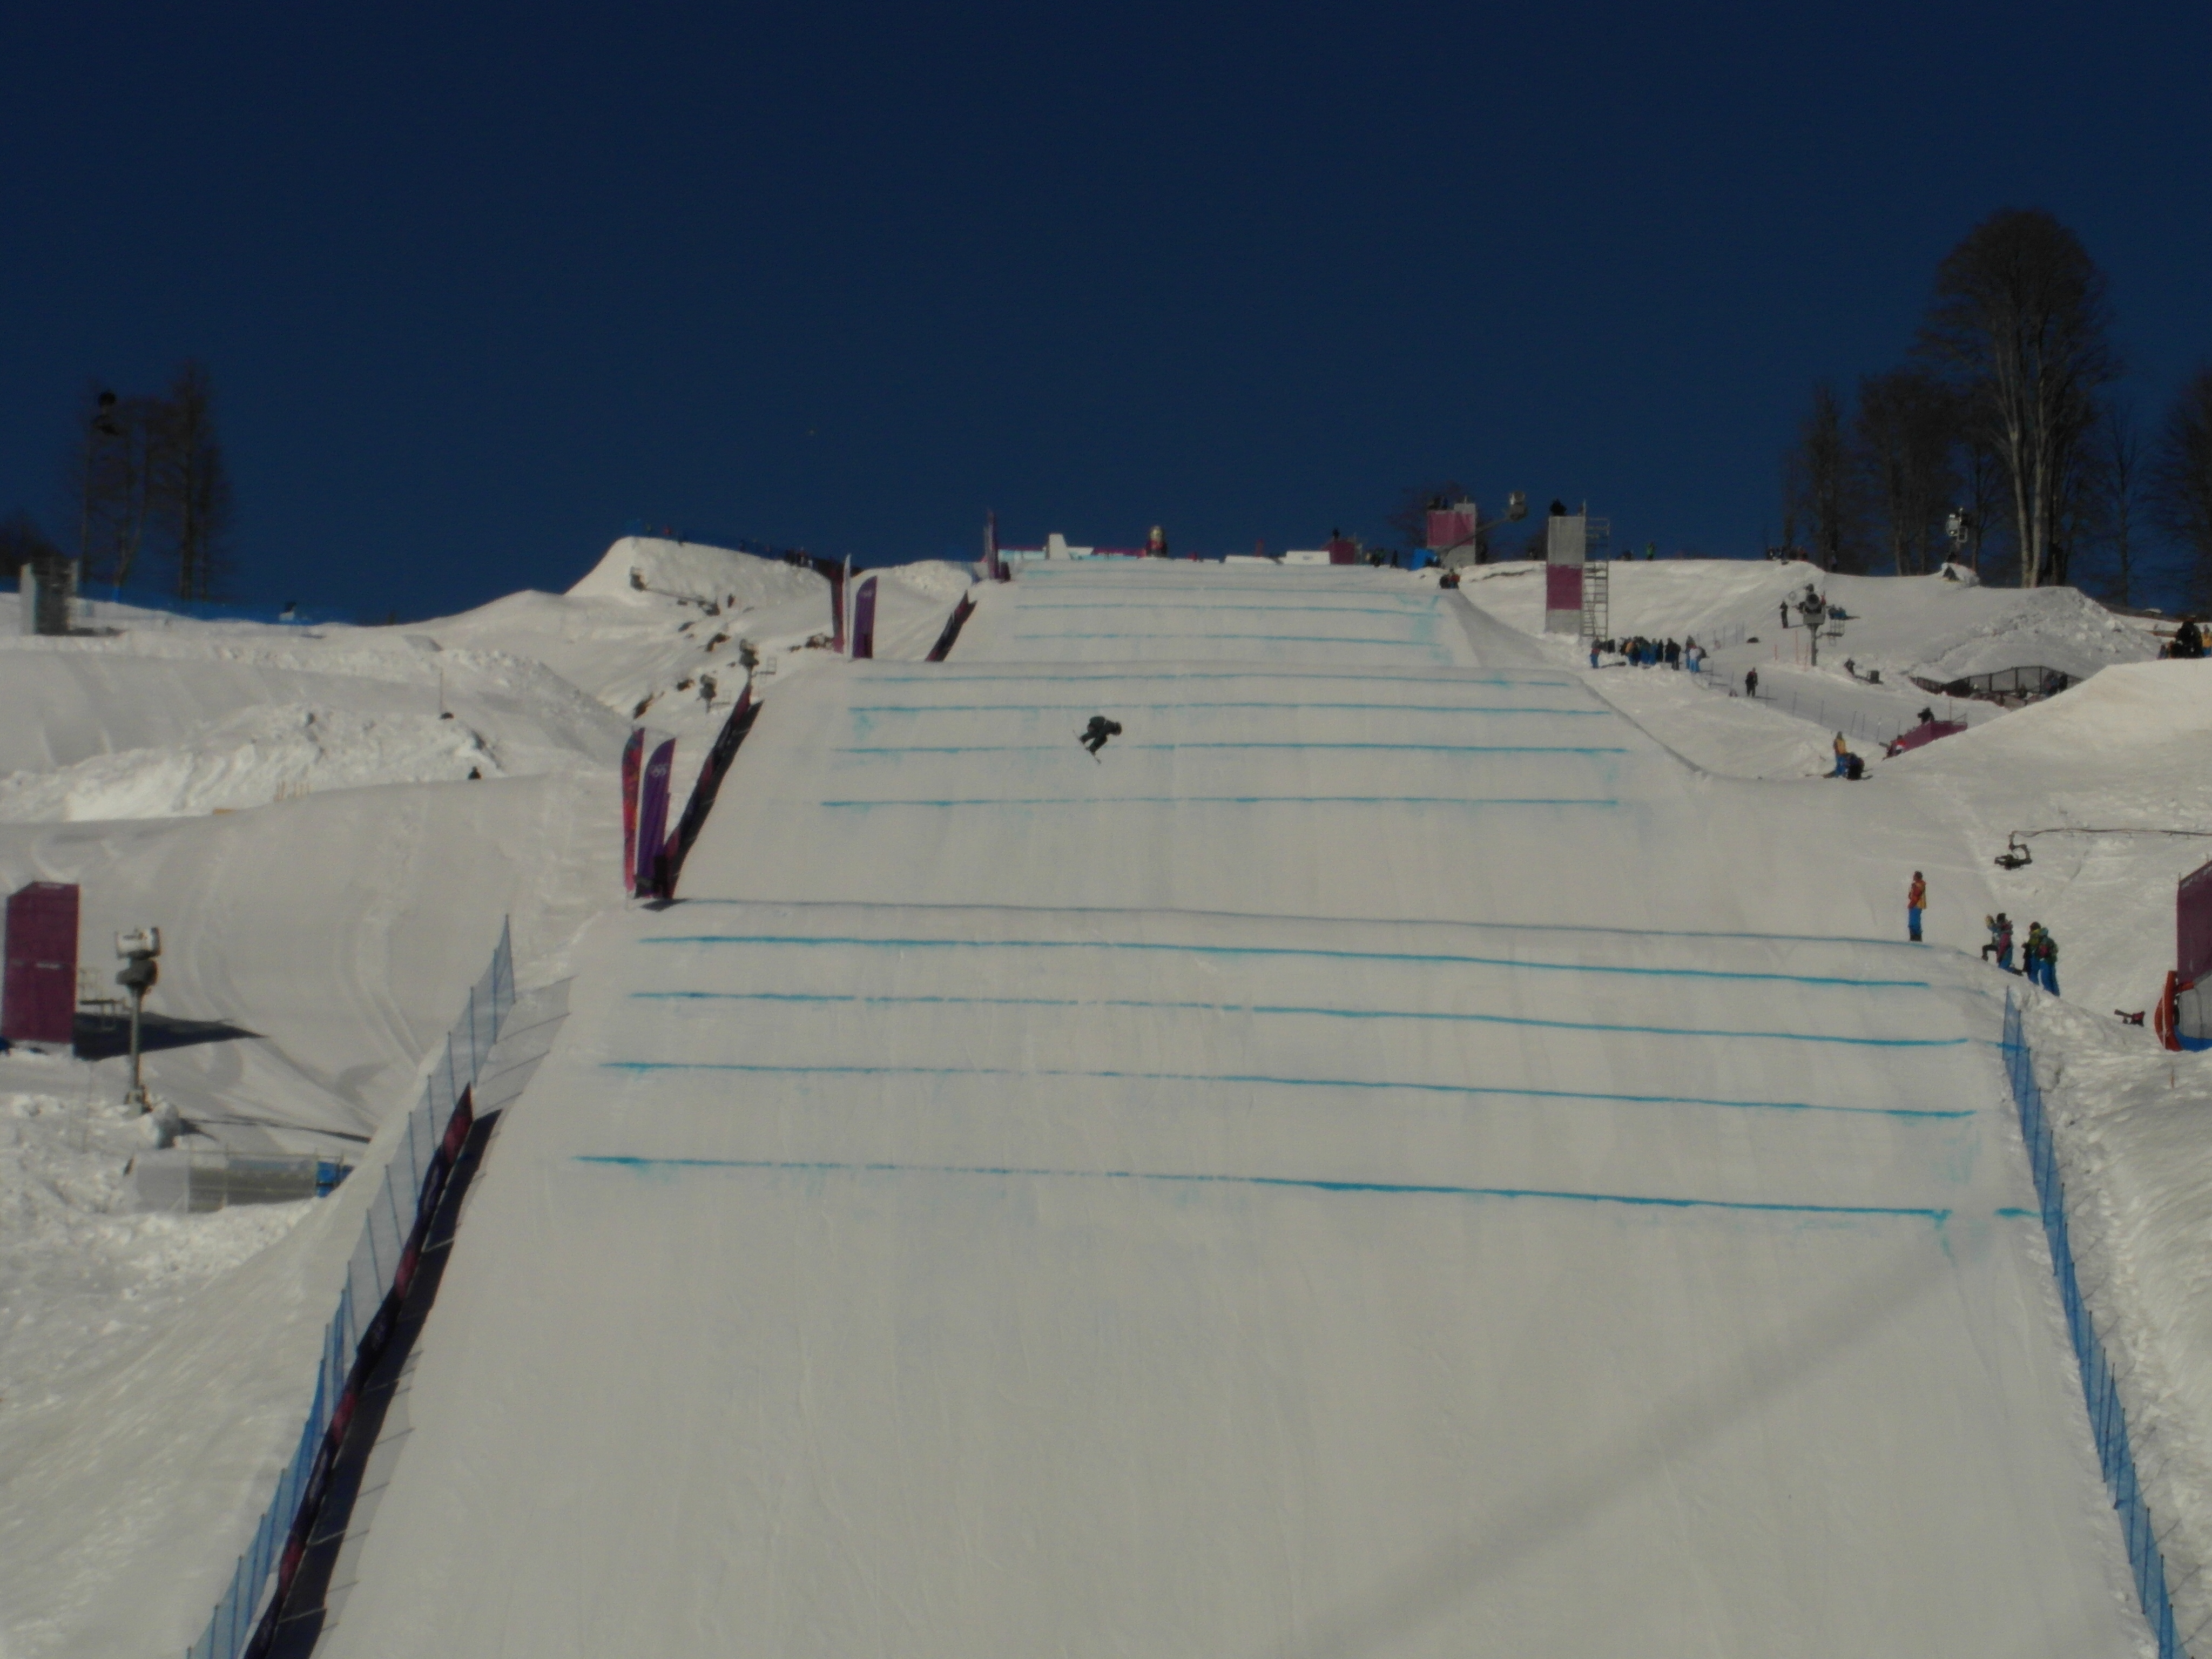 Boarder on Course @ Slopestyle - 1